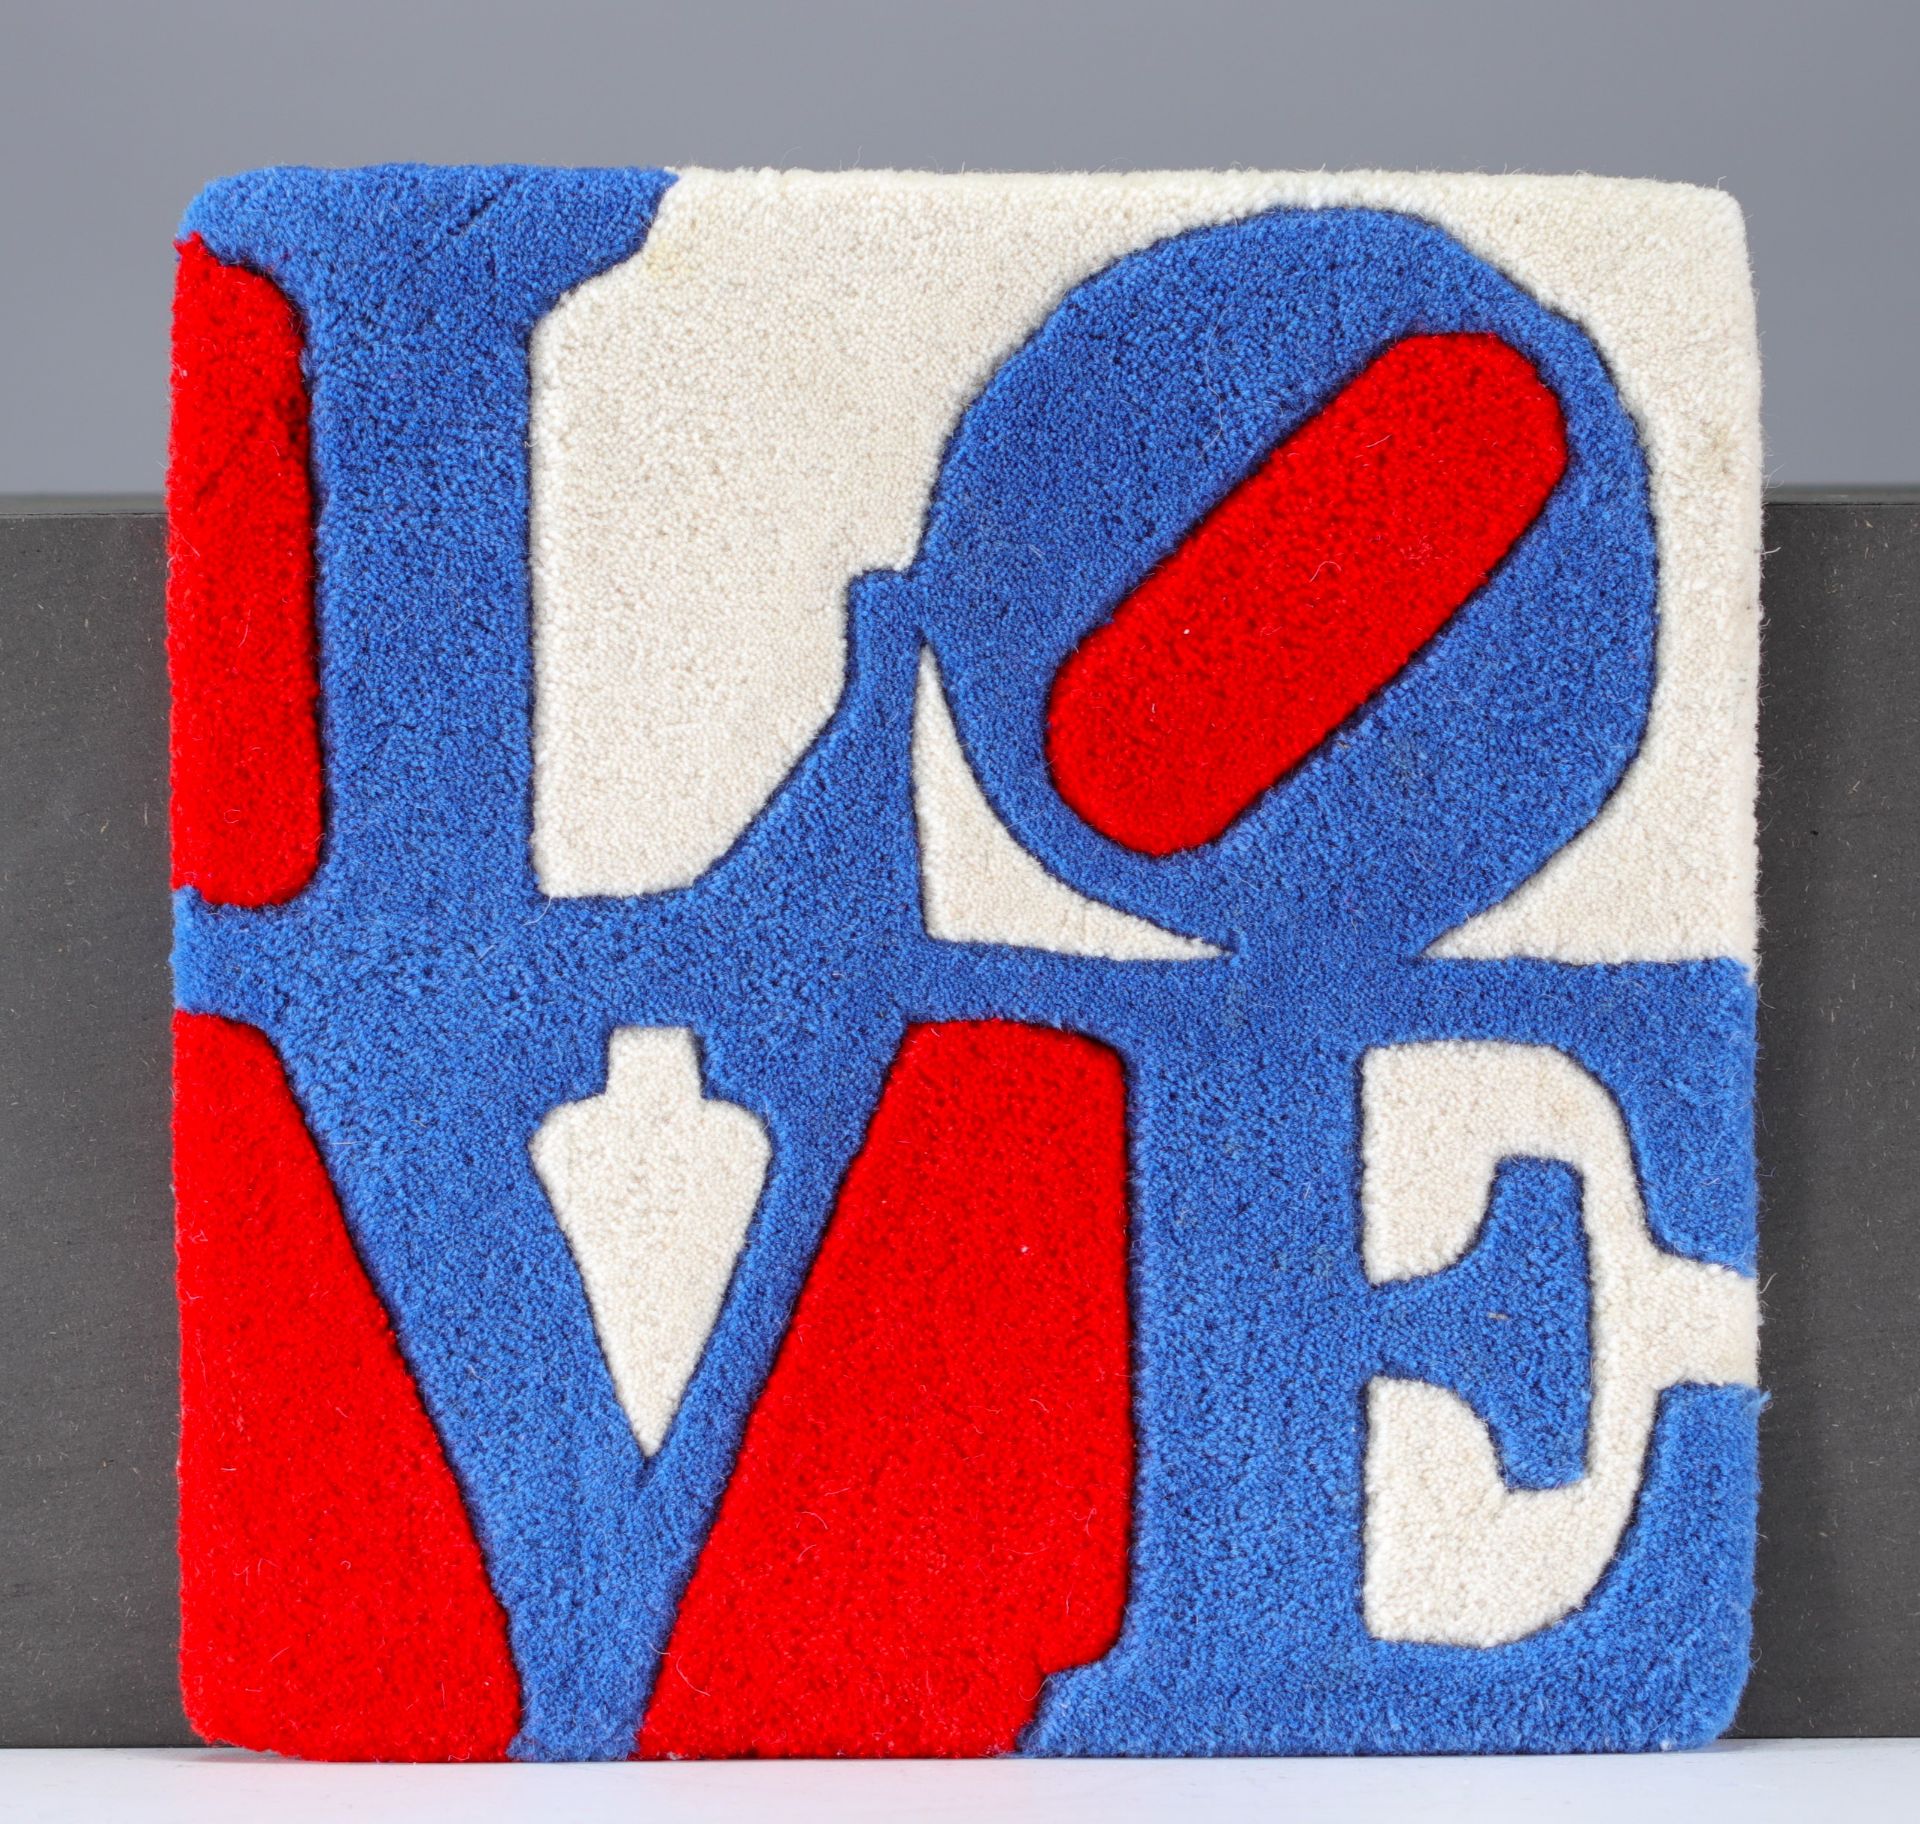 Robert Indiana (1928-2018). CZECH - LOVE - 2006. Tufted wool rug. Printed signature. Numbered "